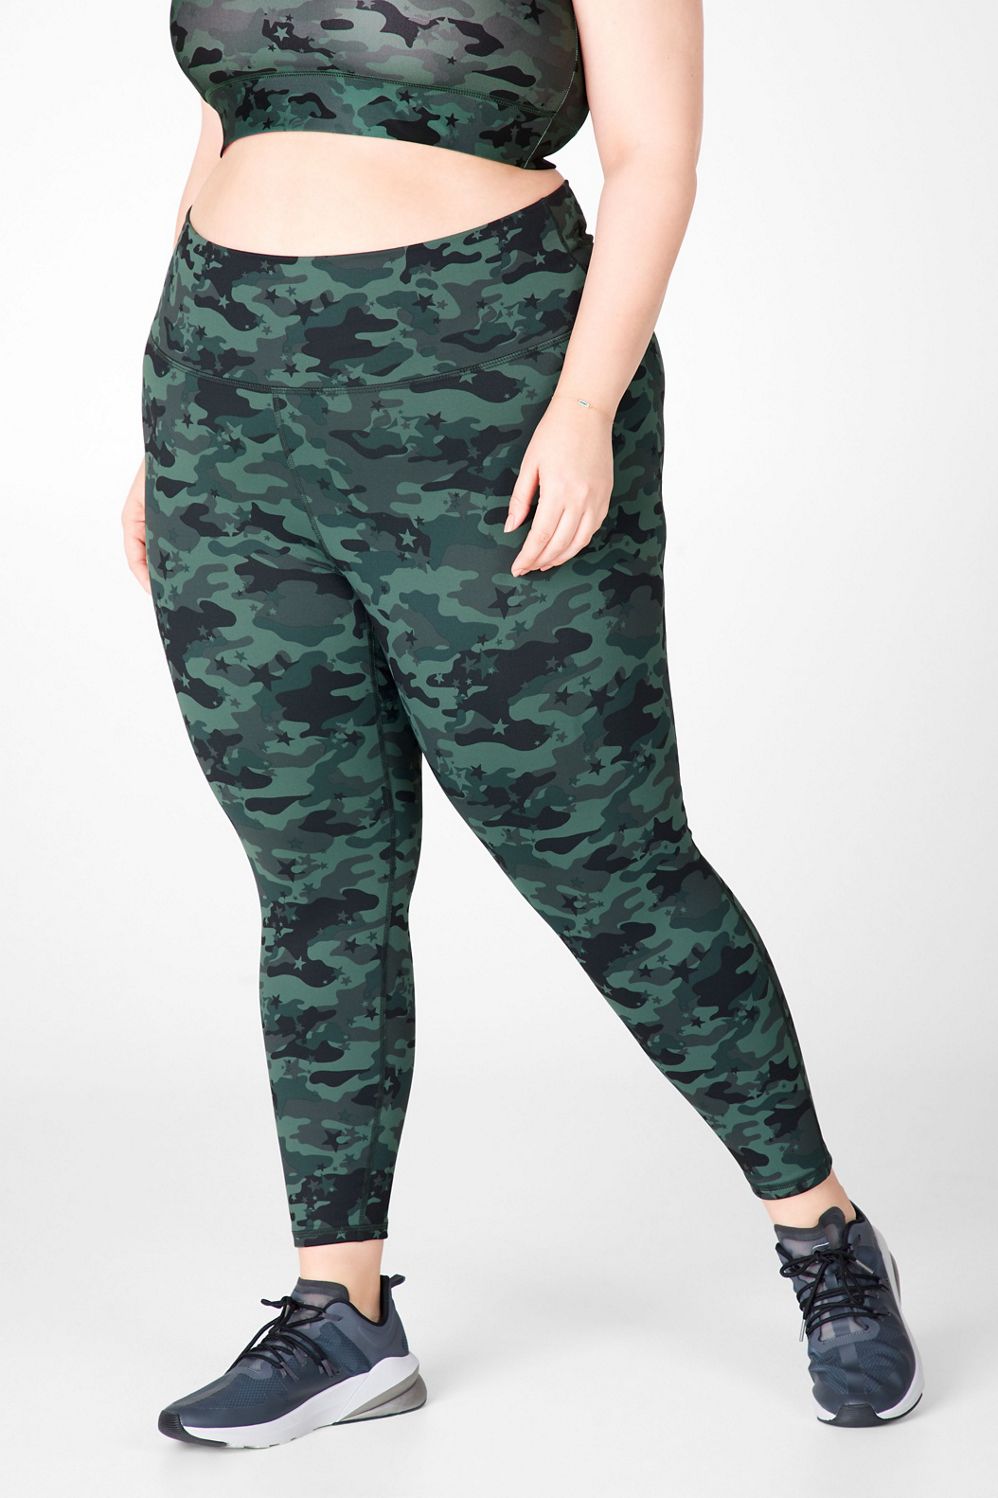 Camo Leggings & Layering Tank, Fabletics Outfit, Athleisure, Spring  Trends 2019, Spring St…